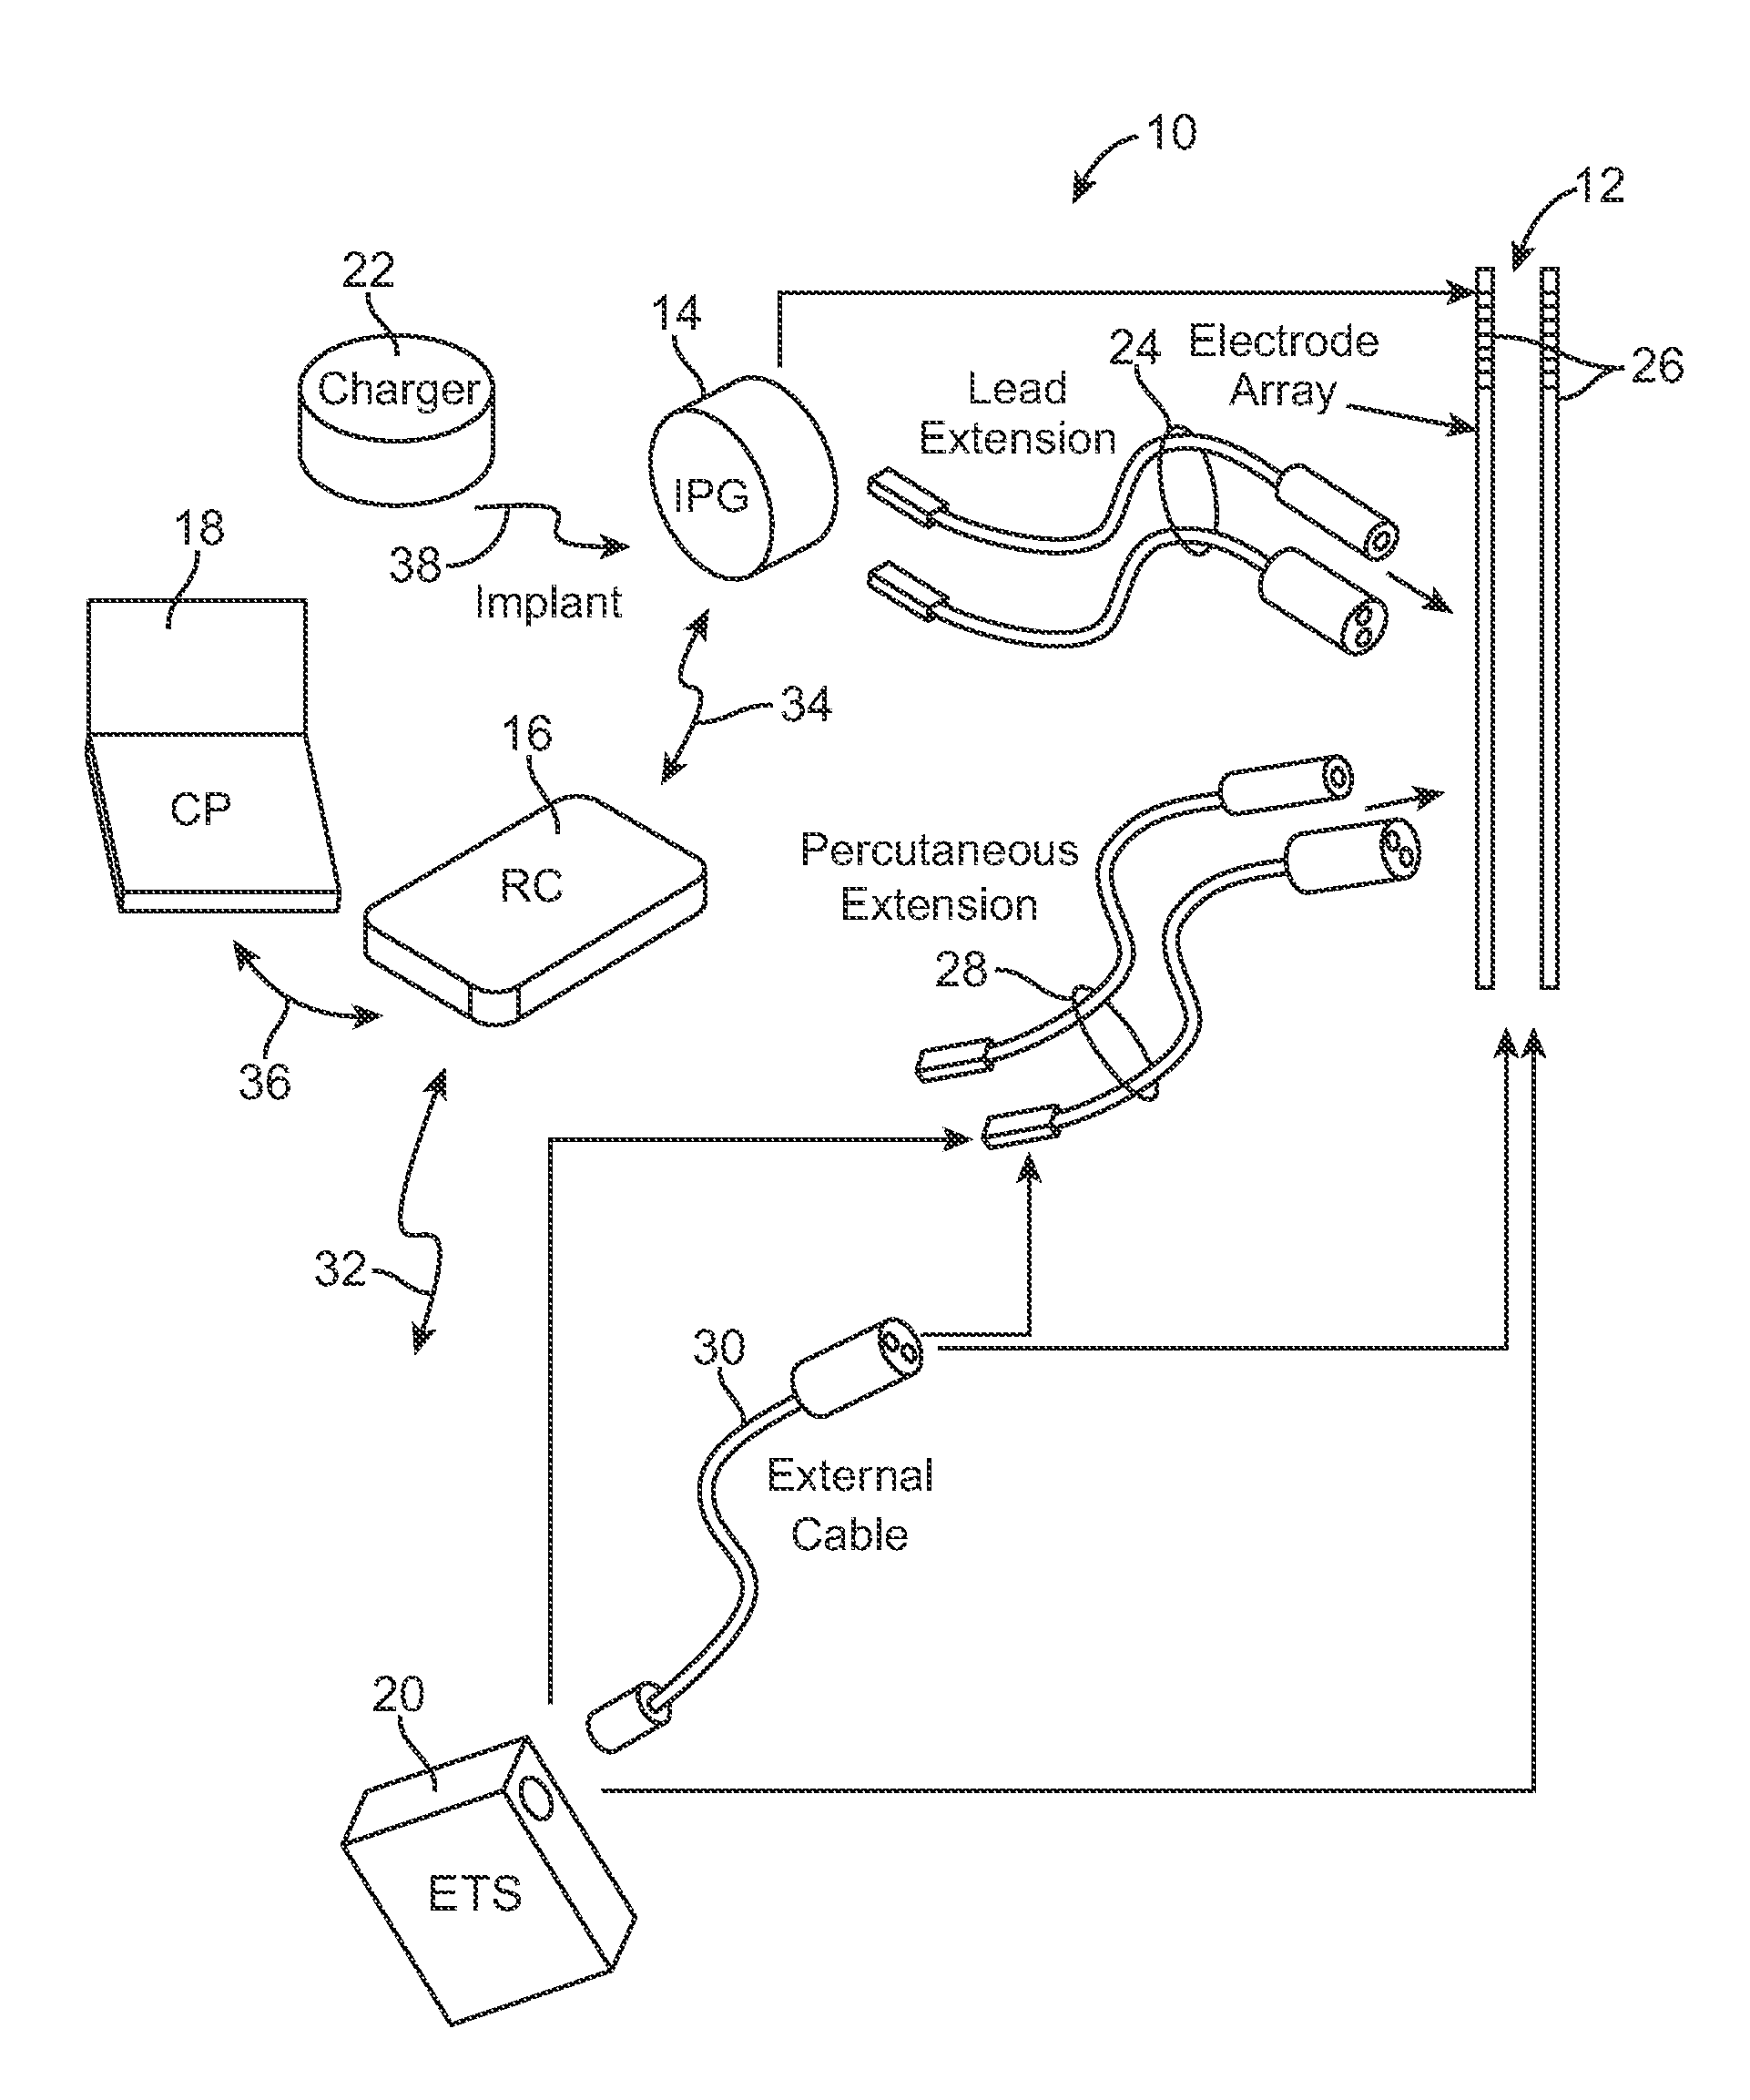 System and method for adjusting automatic pulse parameters to selectively activate nerve fibers